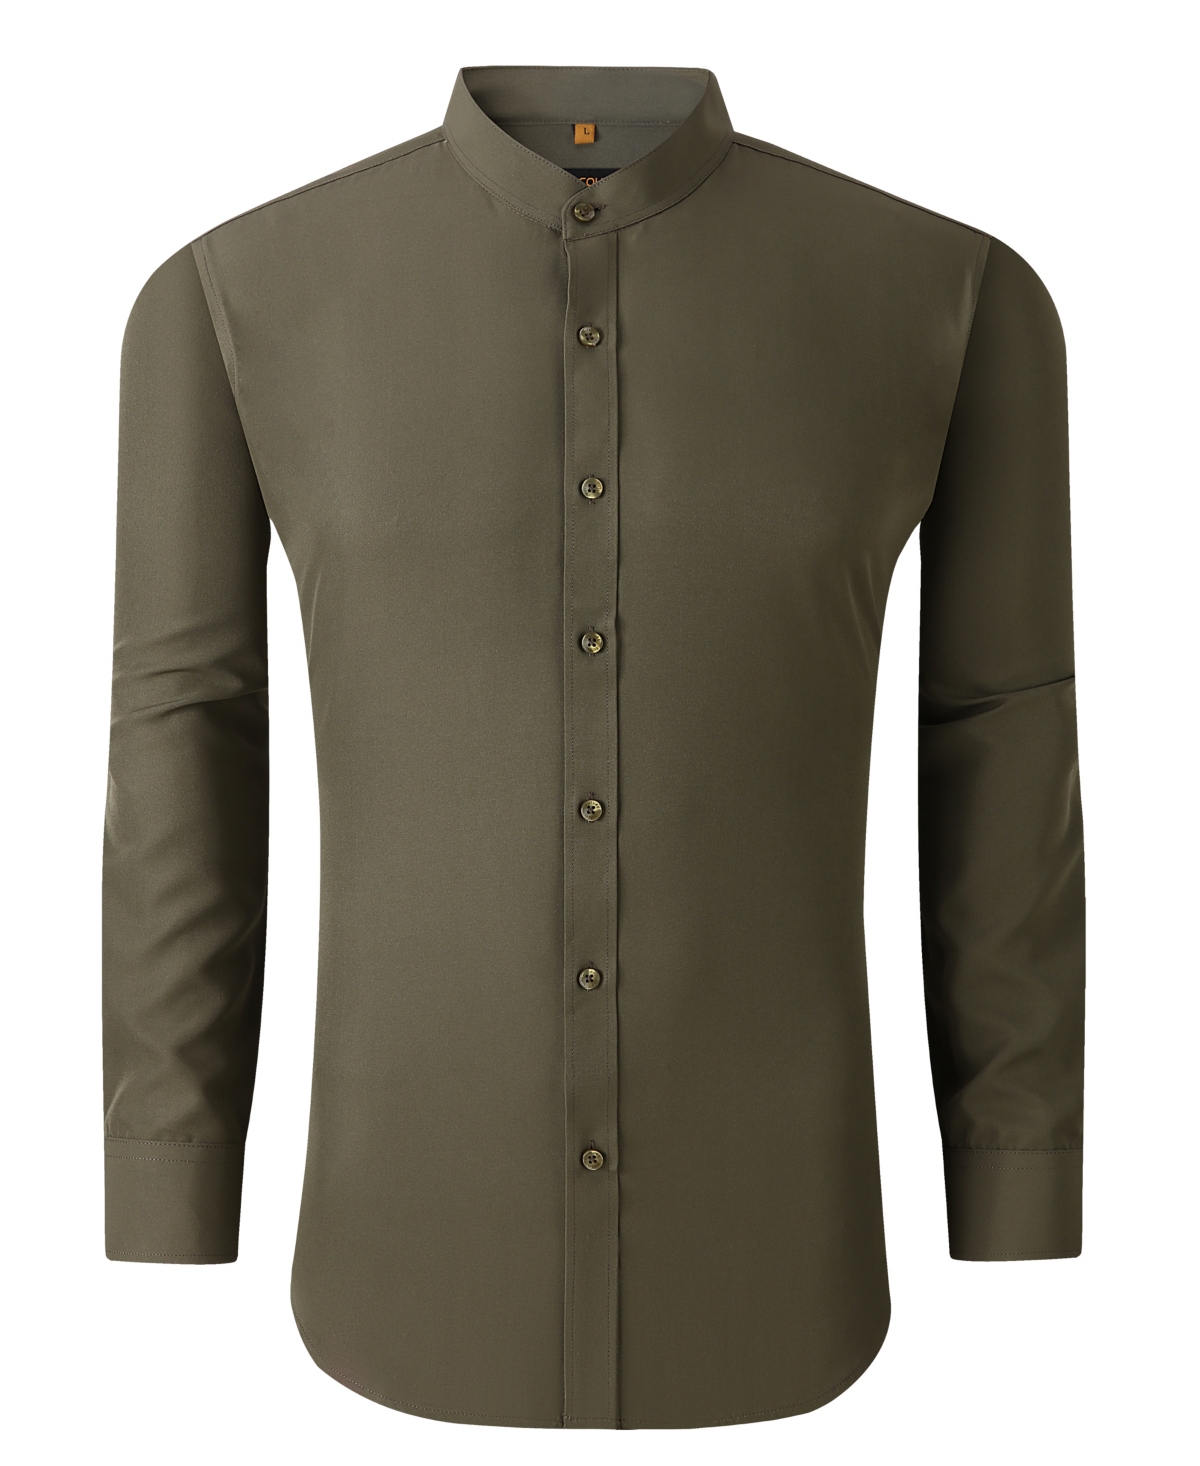 Men's Slim Fit Solid Performance Collarless Button Down Shirt - Olive